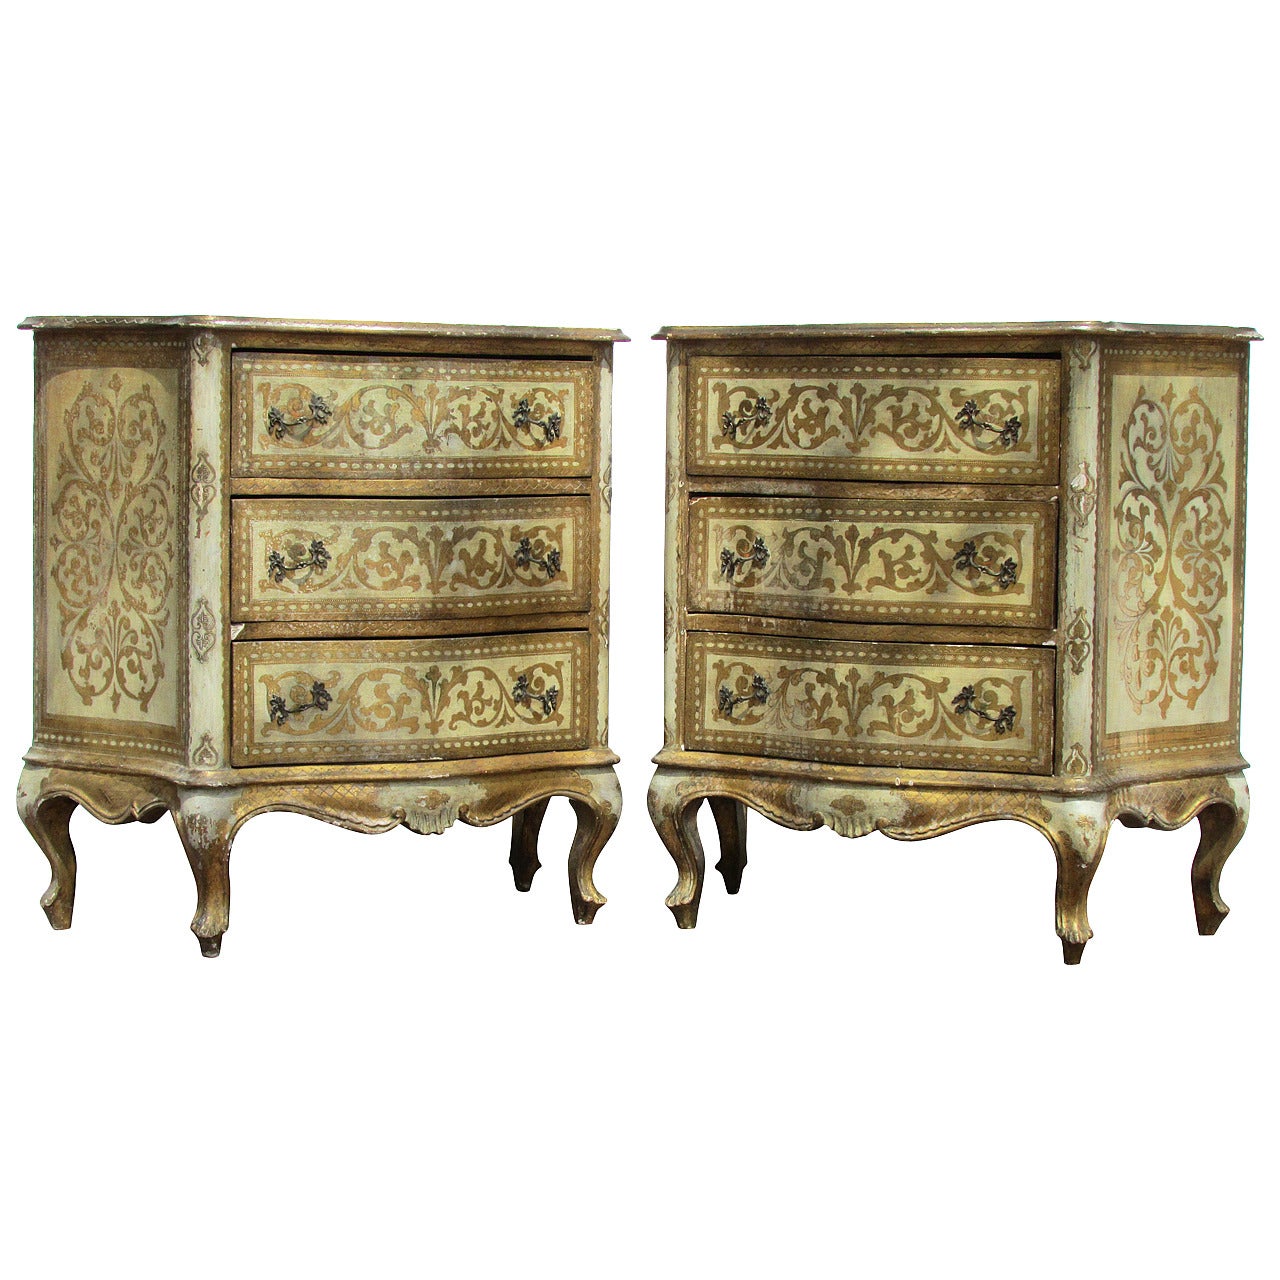 Pair of Venetian Style Three-Drawer Commodes